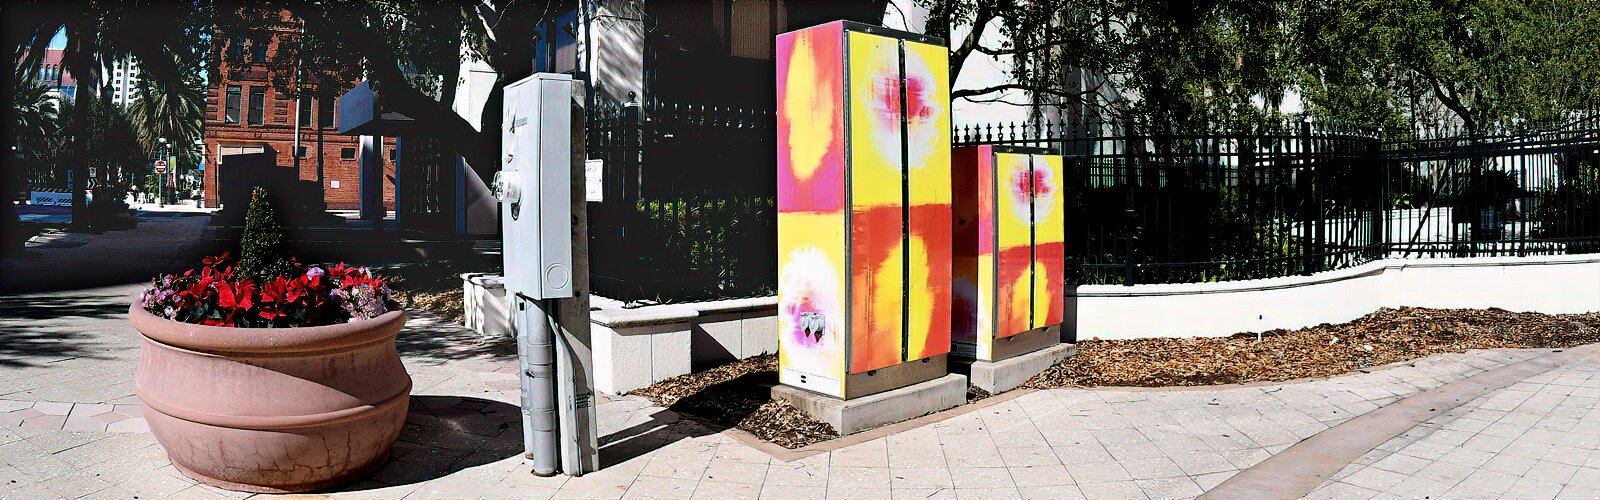 “Bright Squares” by Tampa artist Tim Boatright brings flashes of colors to a plain signal box that is vinyl-wrapped with the artist’s digitized artwork, part of the “Thinking Outside the Box” program of the Clearwater Arts Alliance.